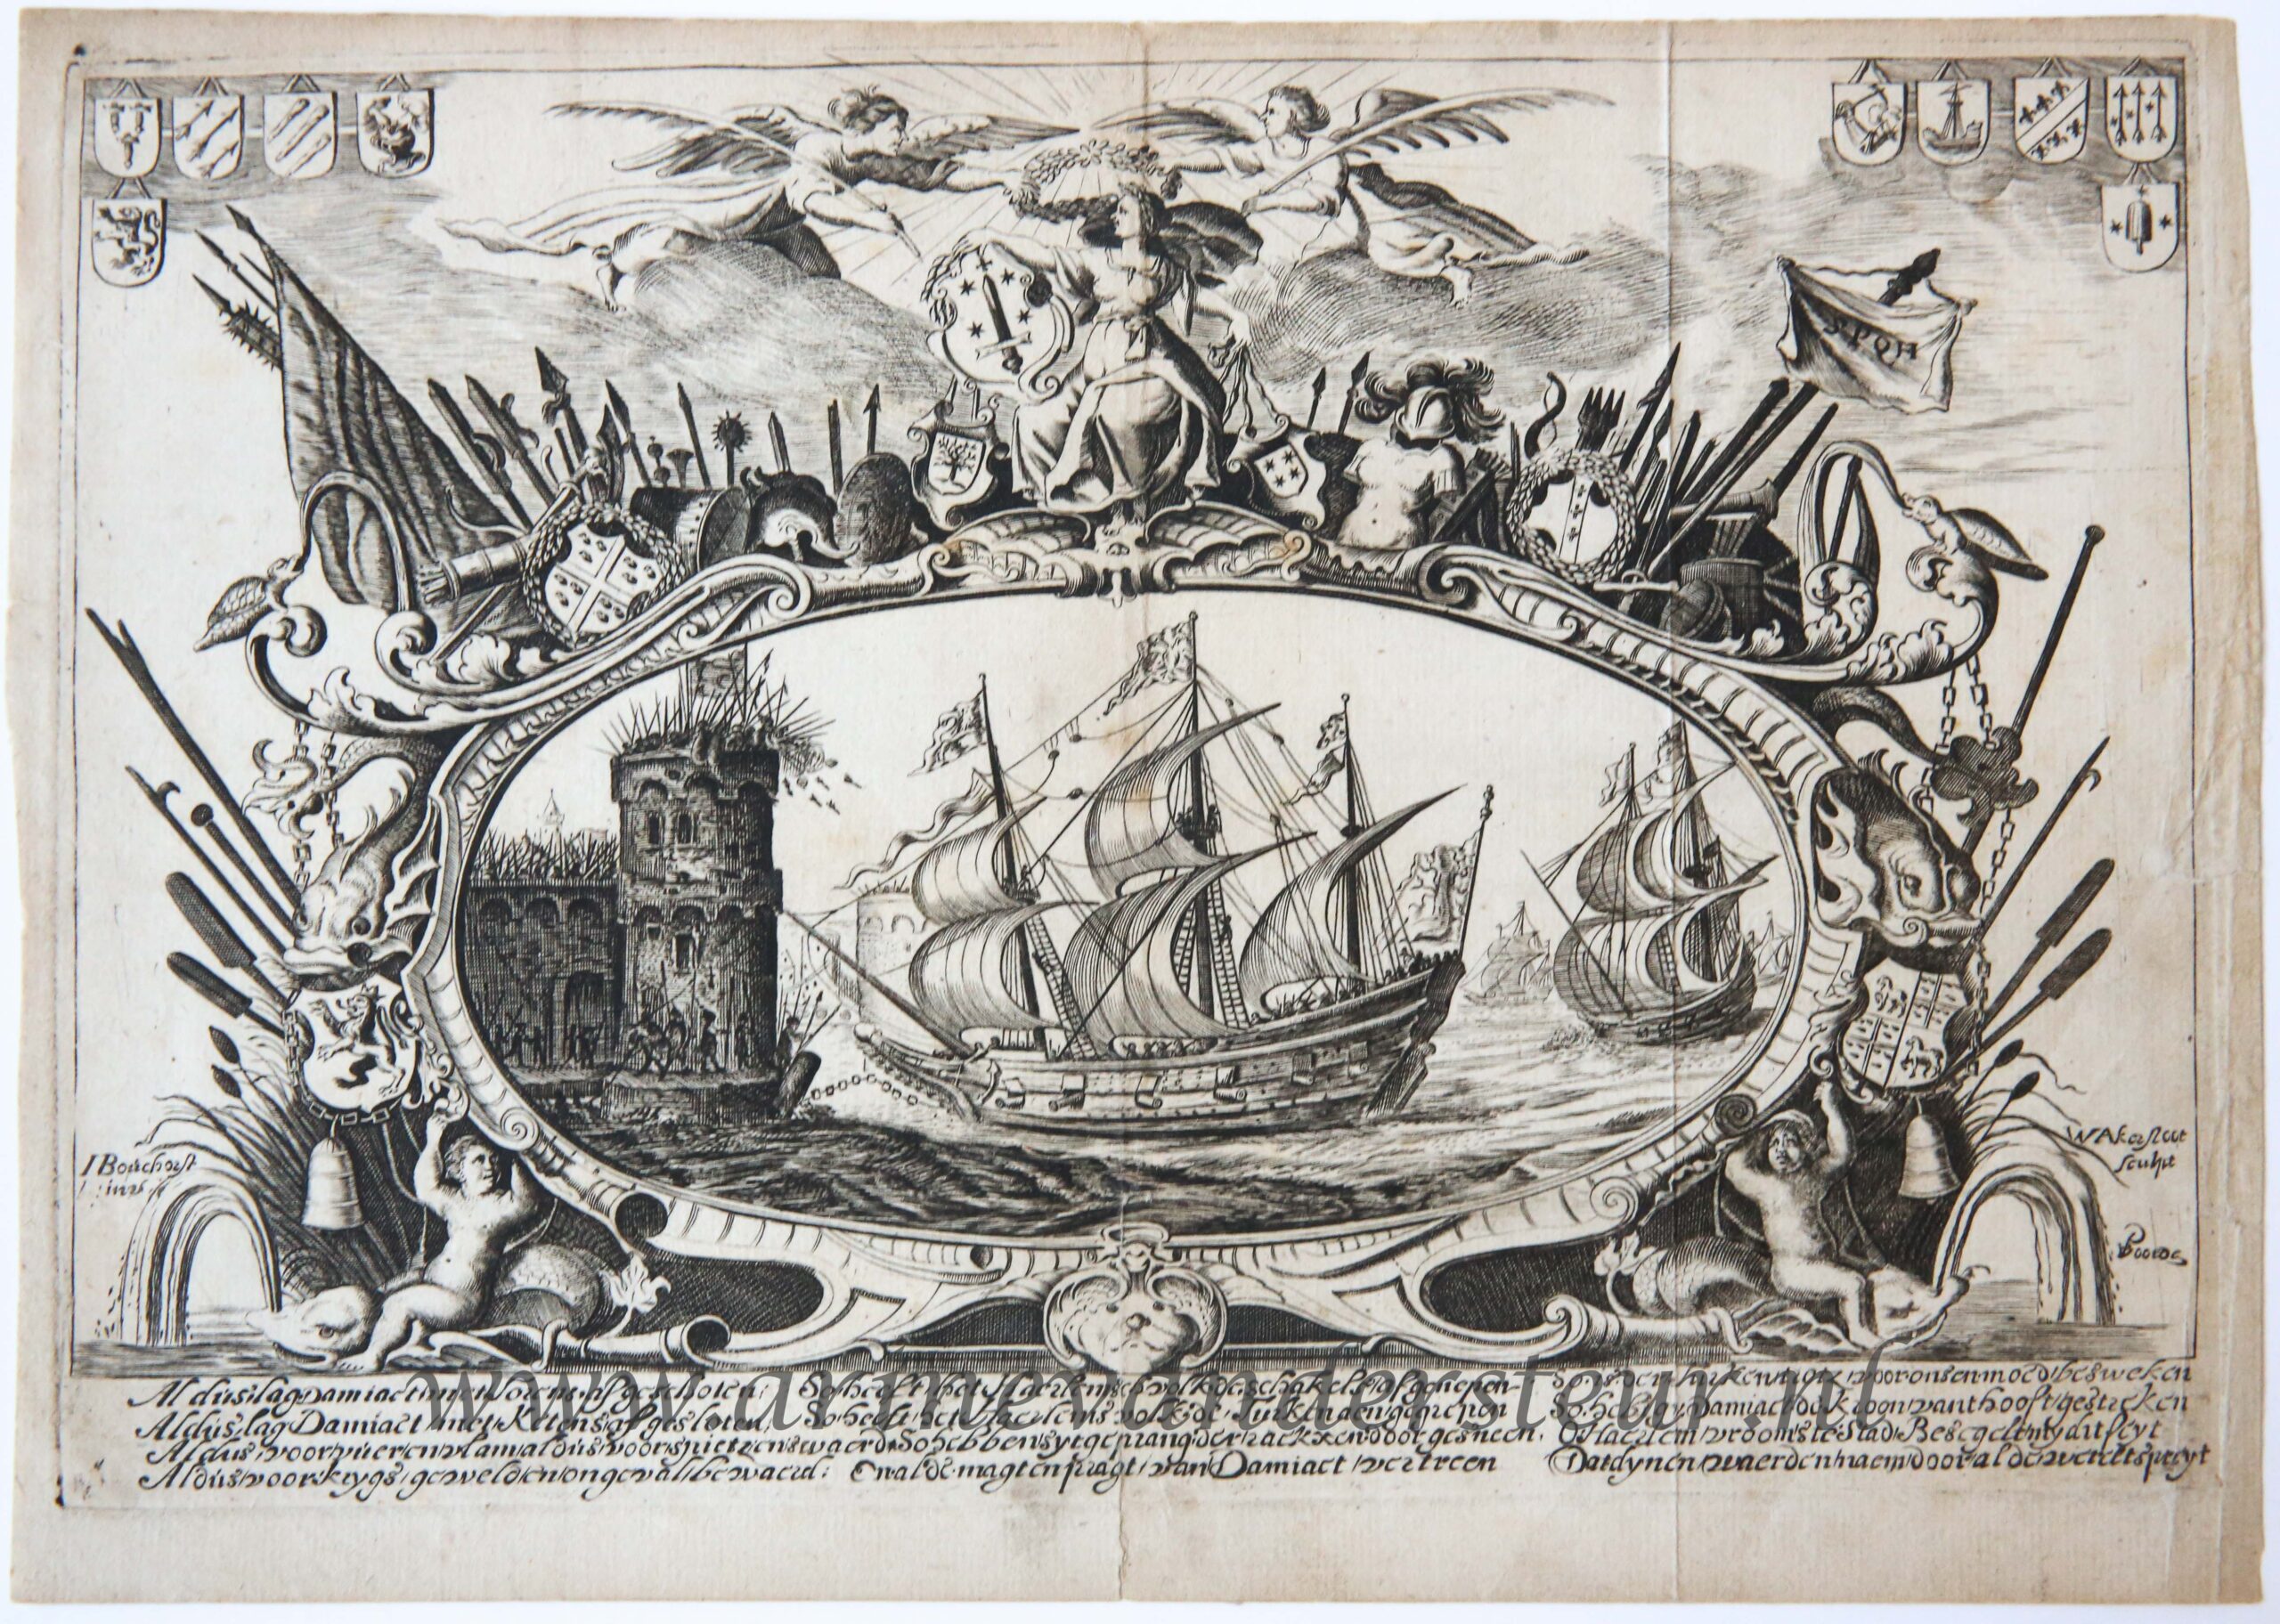 [antique print, etching] Unknown master after W.O. Akersloot after J. P. van Bouckhorst, The capture of Damietta, after 1628.